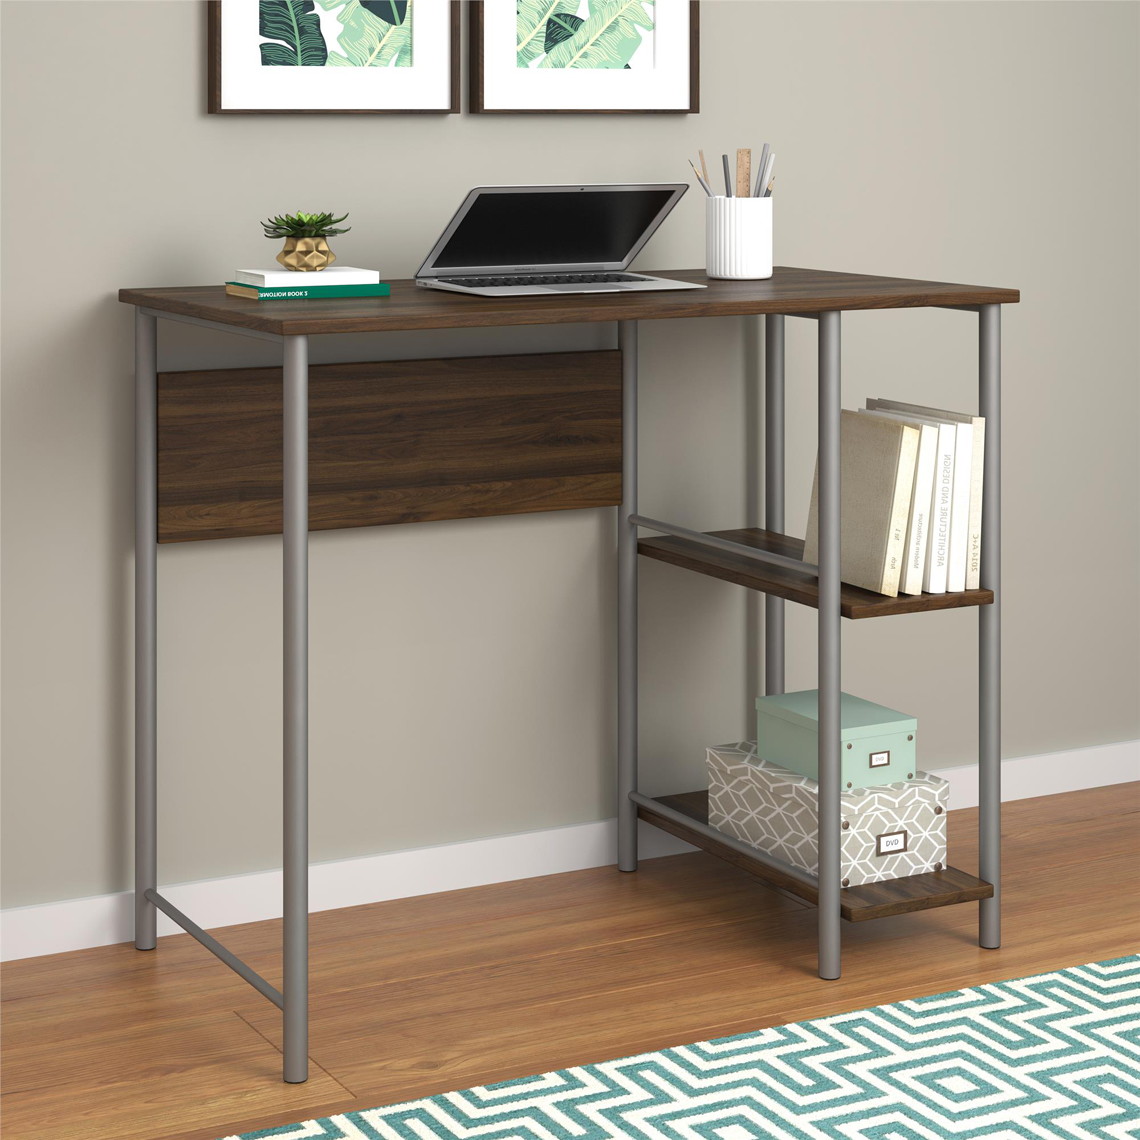 Mainstays Basic Student Desk As Low As 39 At Walmart The